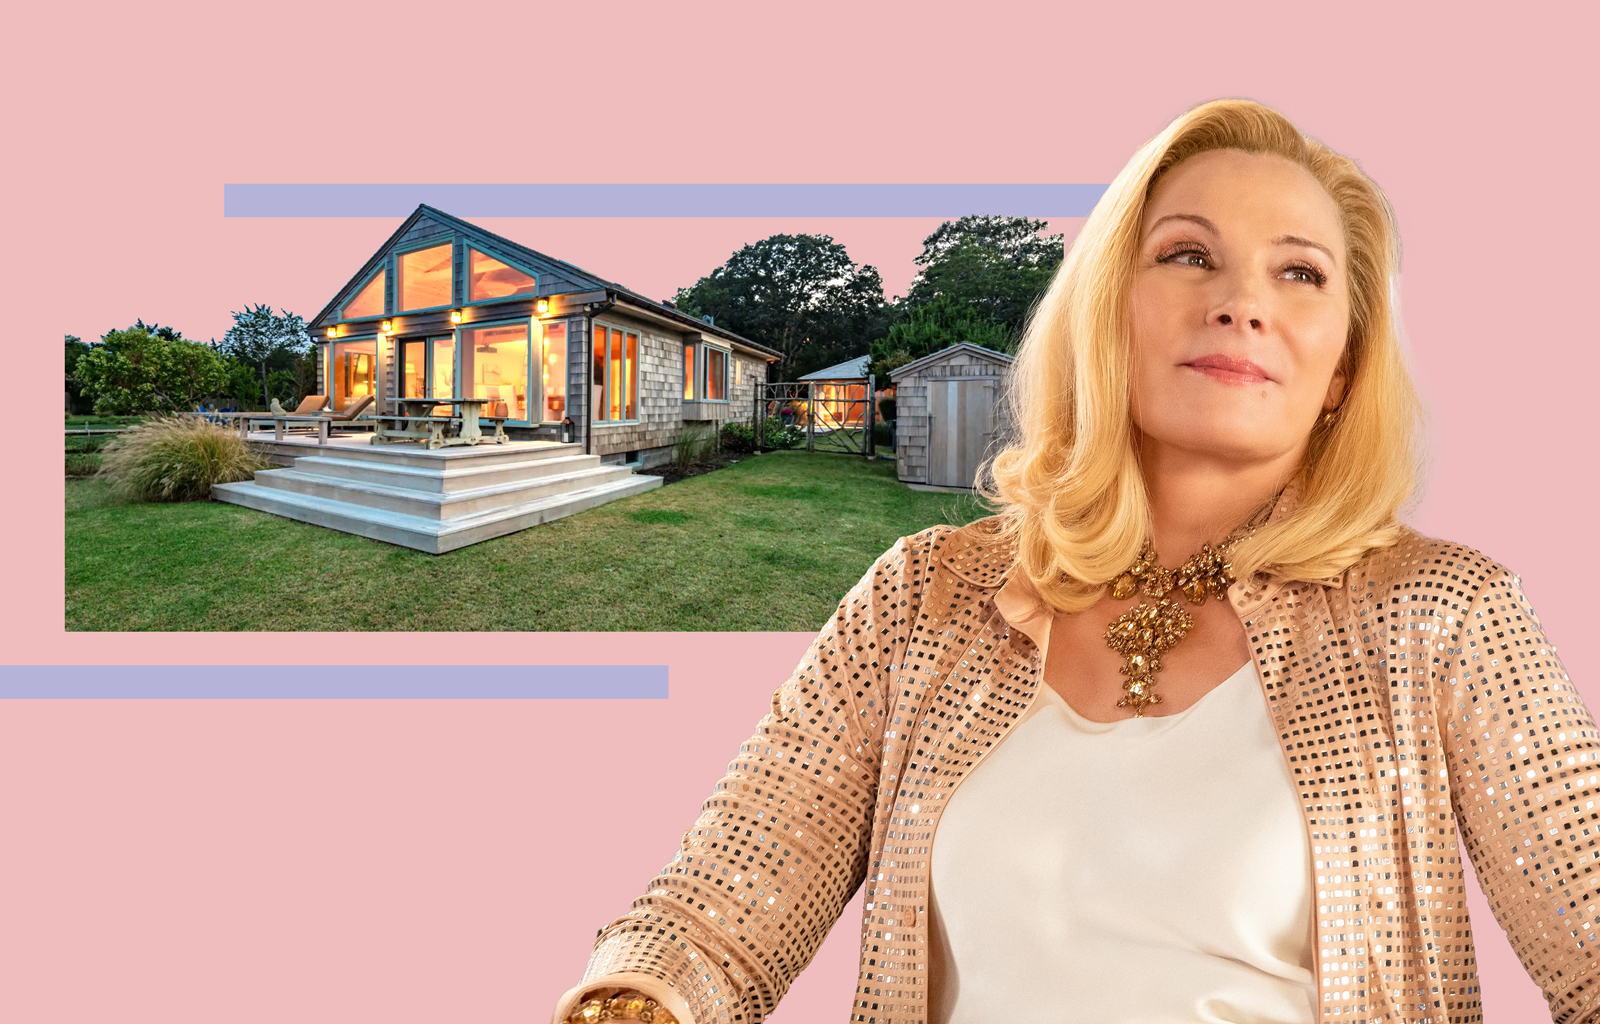 Kim Cattrall and 105 Gerard Drive in East Hampton (Getty; Sotheby’s via Rebekah C Baker)